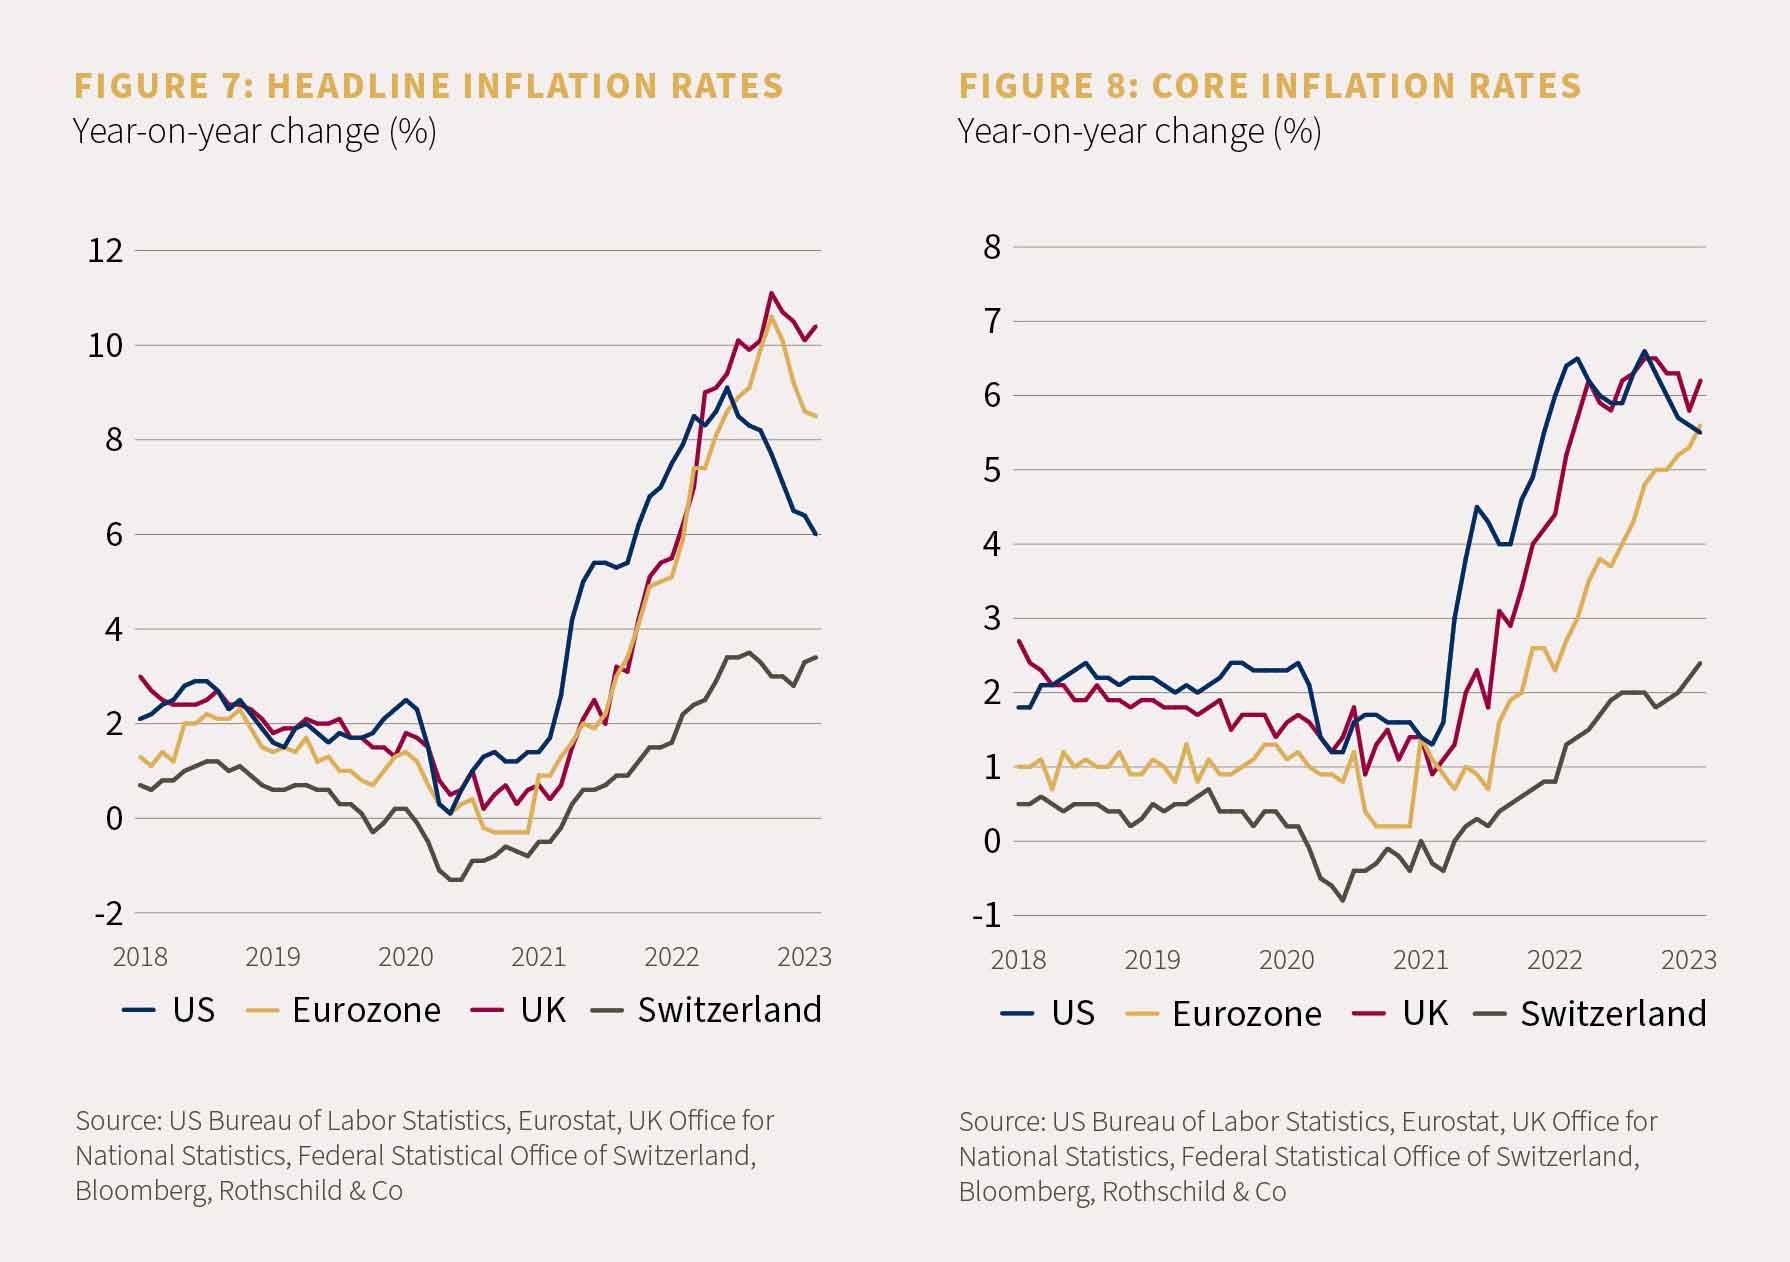 Chart showing headline inflation rates and chart showing core inflation rates